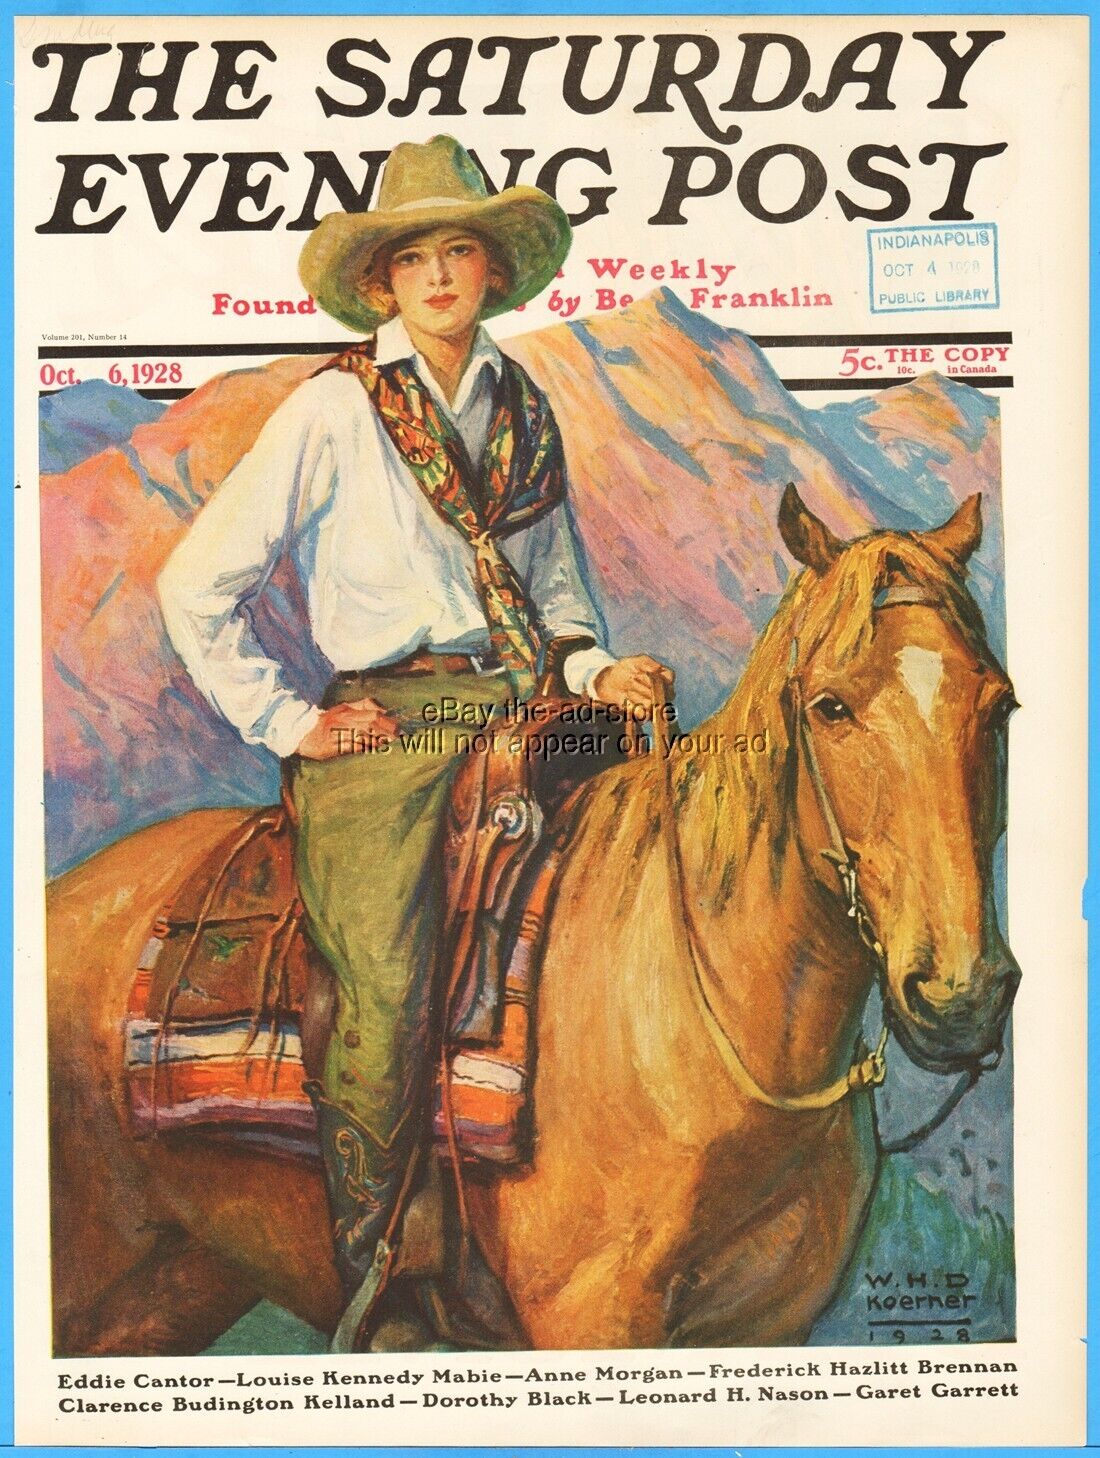 1928 Saturday Evening Post W.H.D. Koerner Woman on Horse Mnt Front Cover ONLY